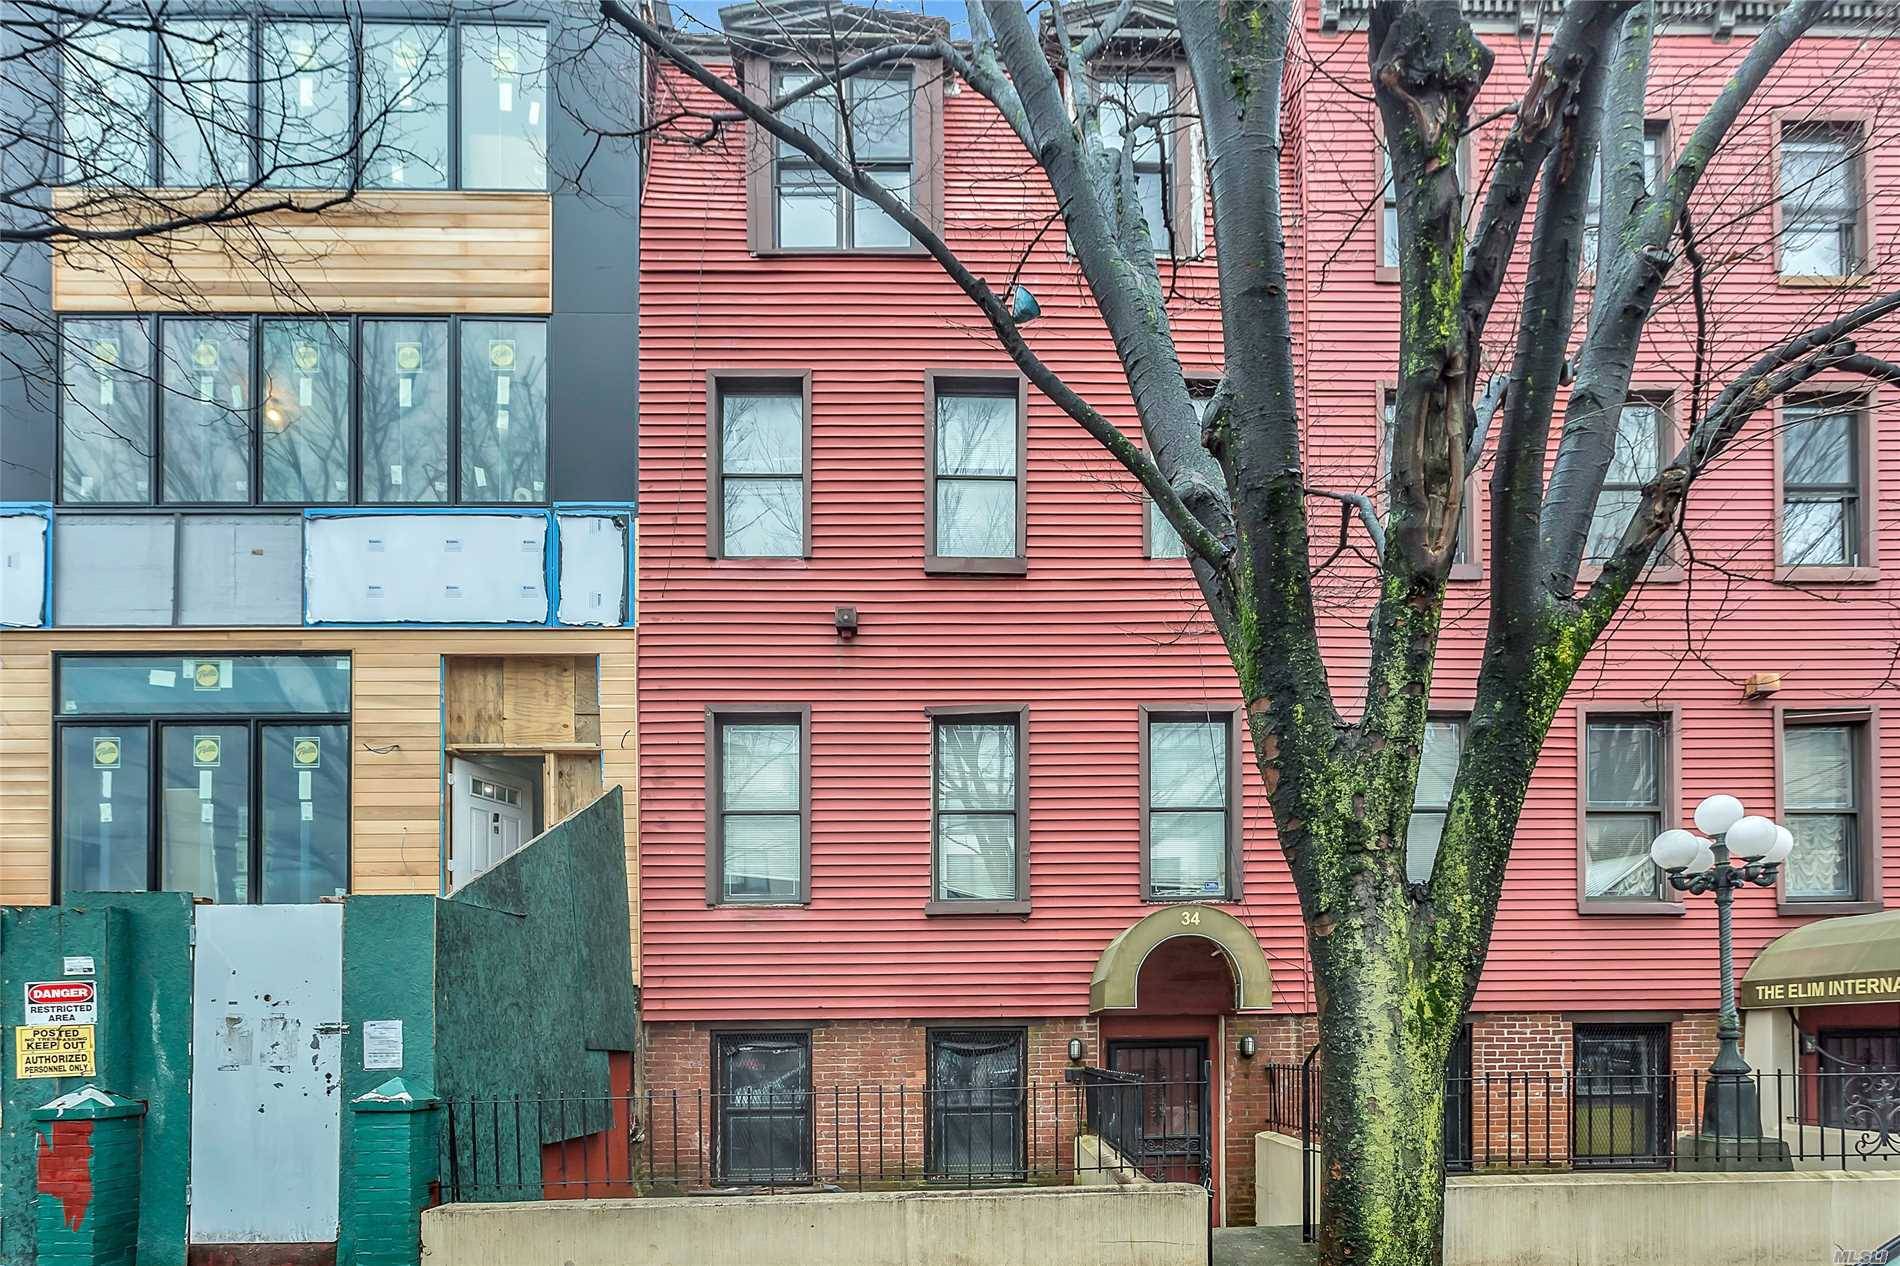 Great Opportunity To Renovate 4 Story Property In Desirable Bed Stuy Bordering Prestigious Clinton Hill.